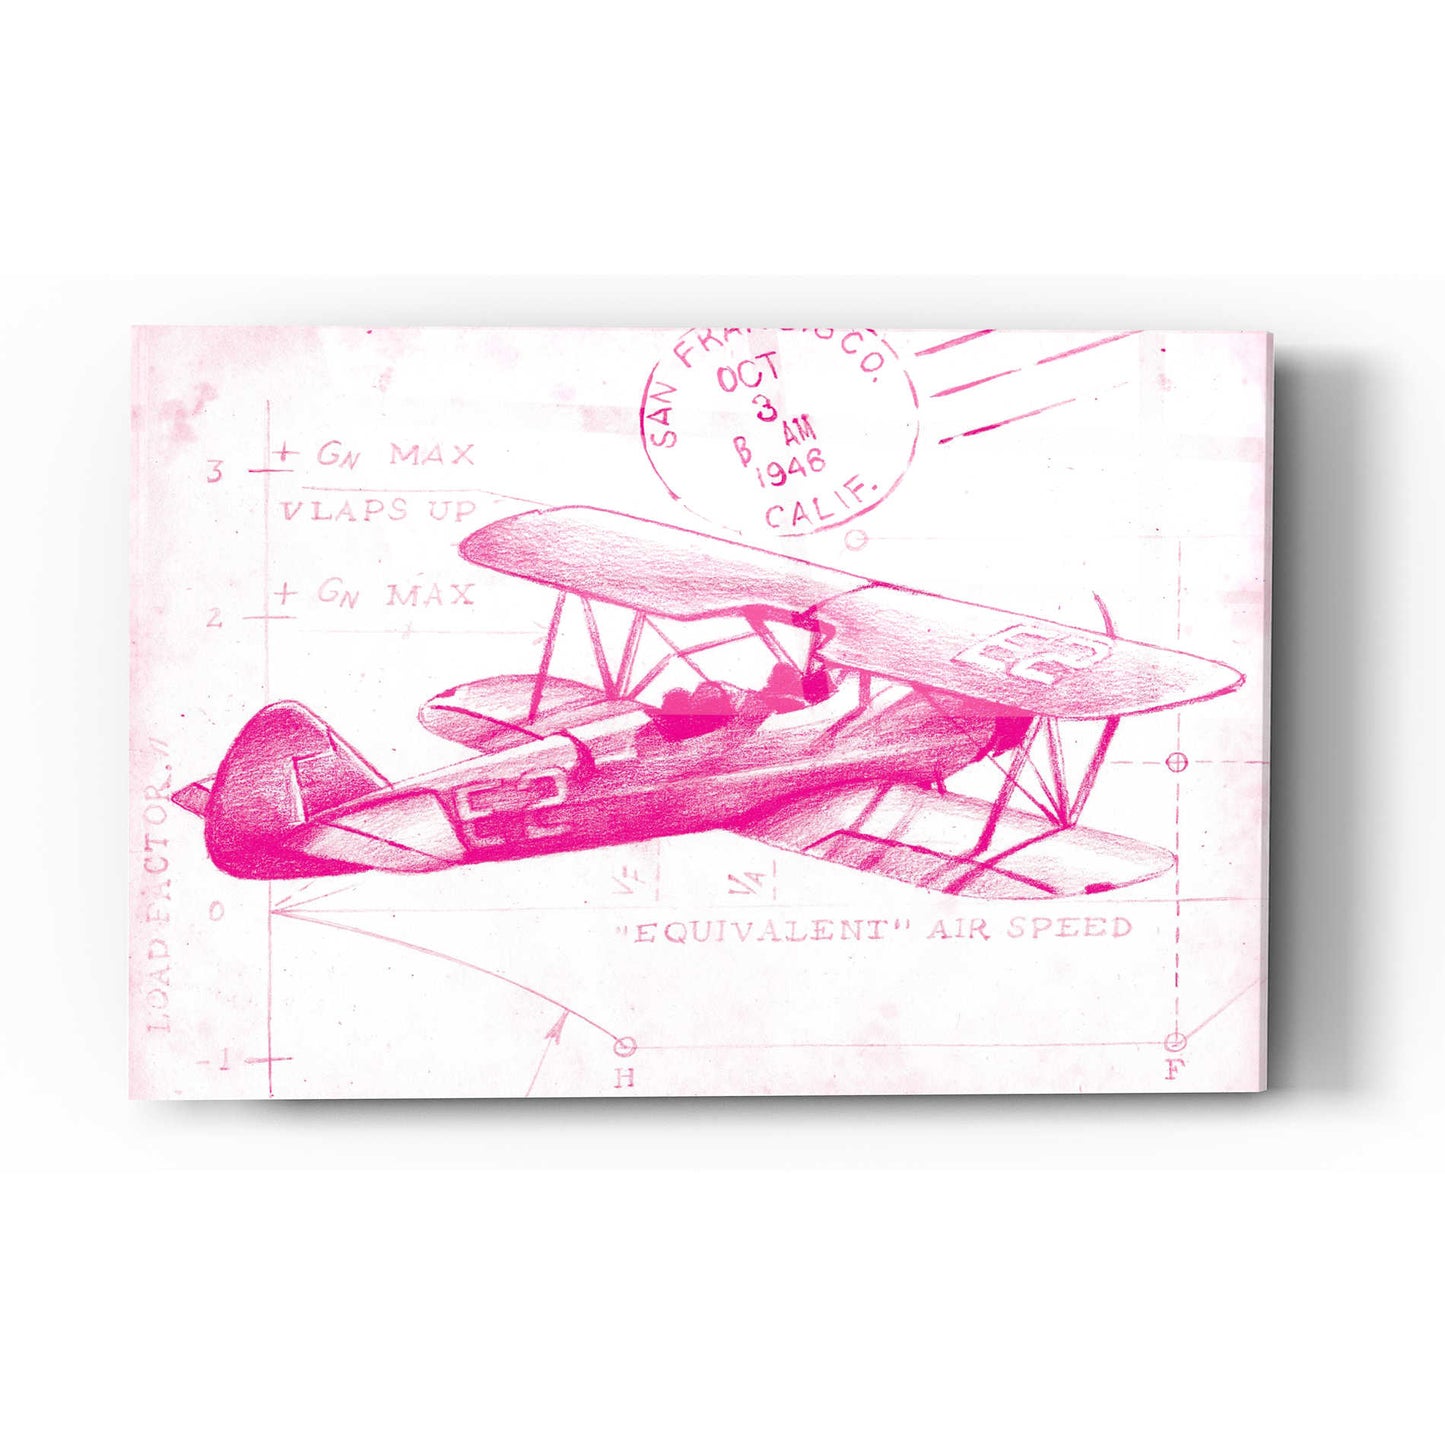 Epic Art 'Flight Schematic I in Pink' by Ethan Harper Acrylic Glass Wall Art,12x16